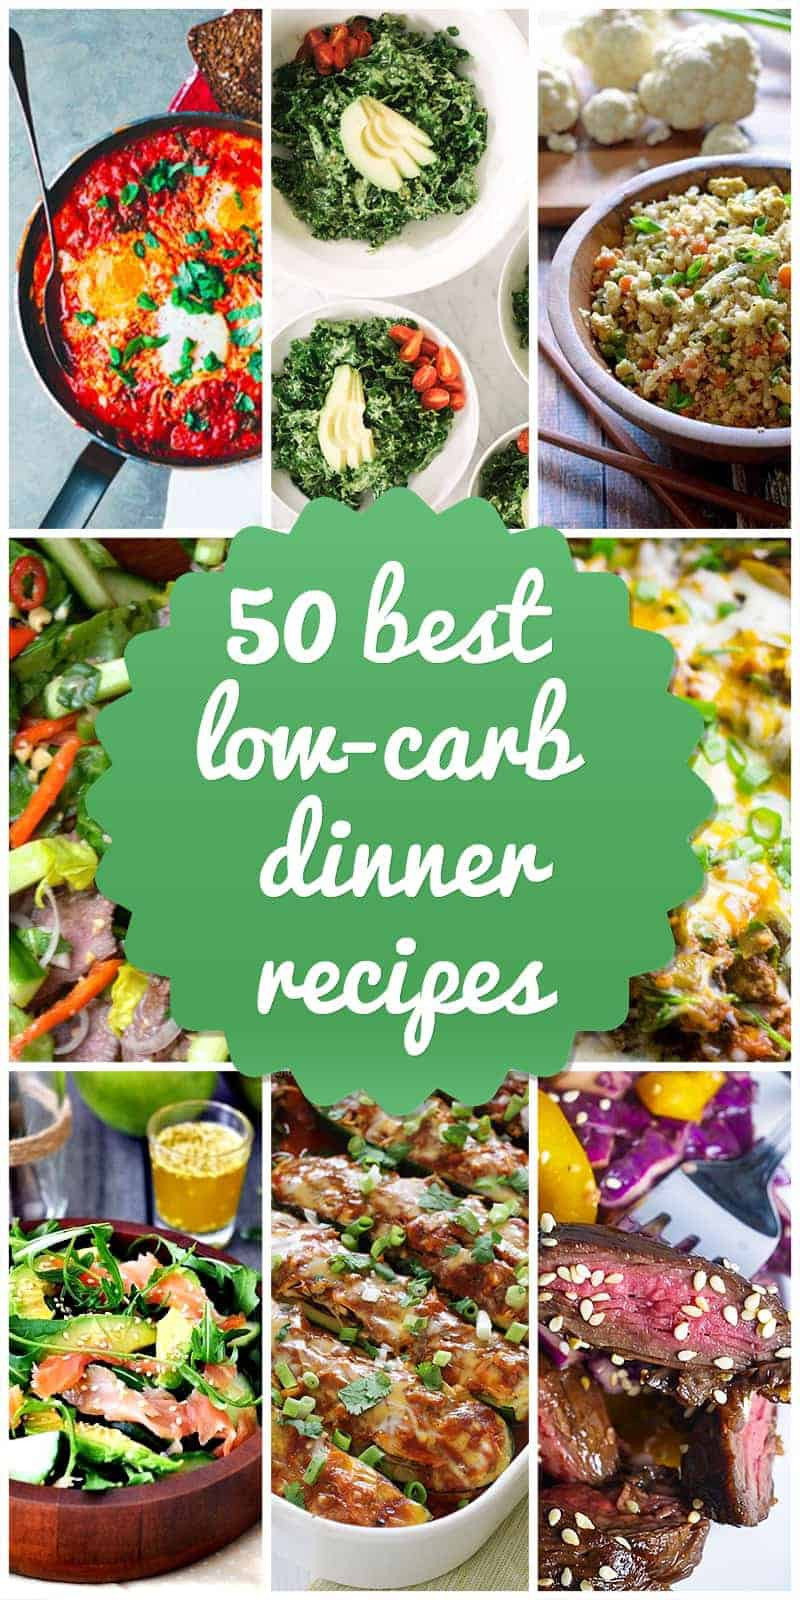 Low Carb Low Fat Dinners
 50 Best Low Carb Dinners Recipes and Ideas